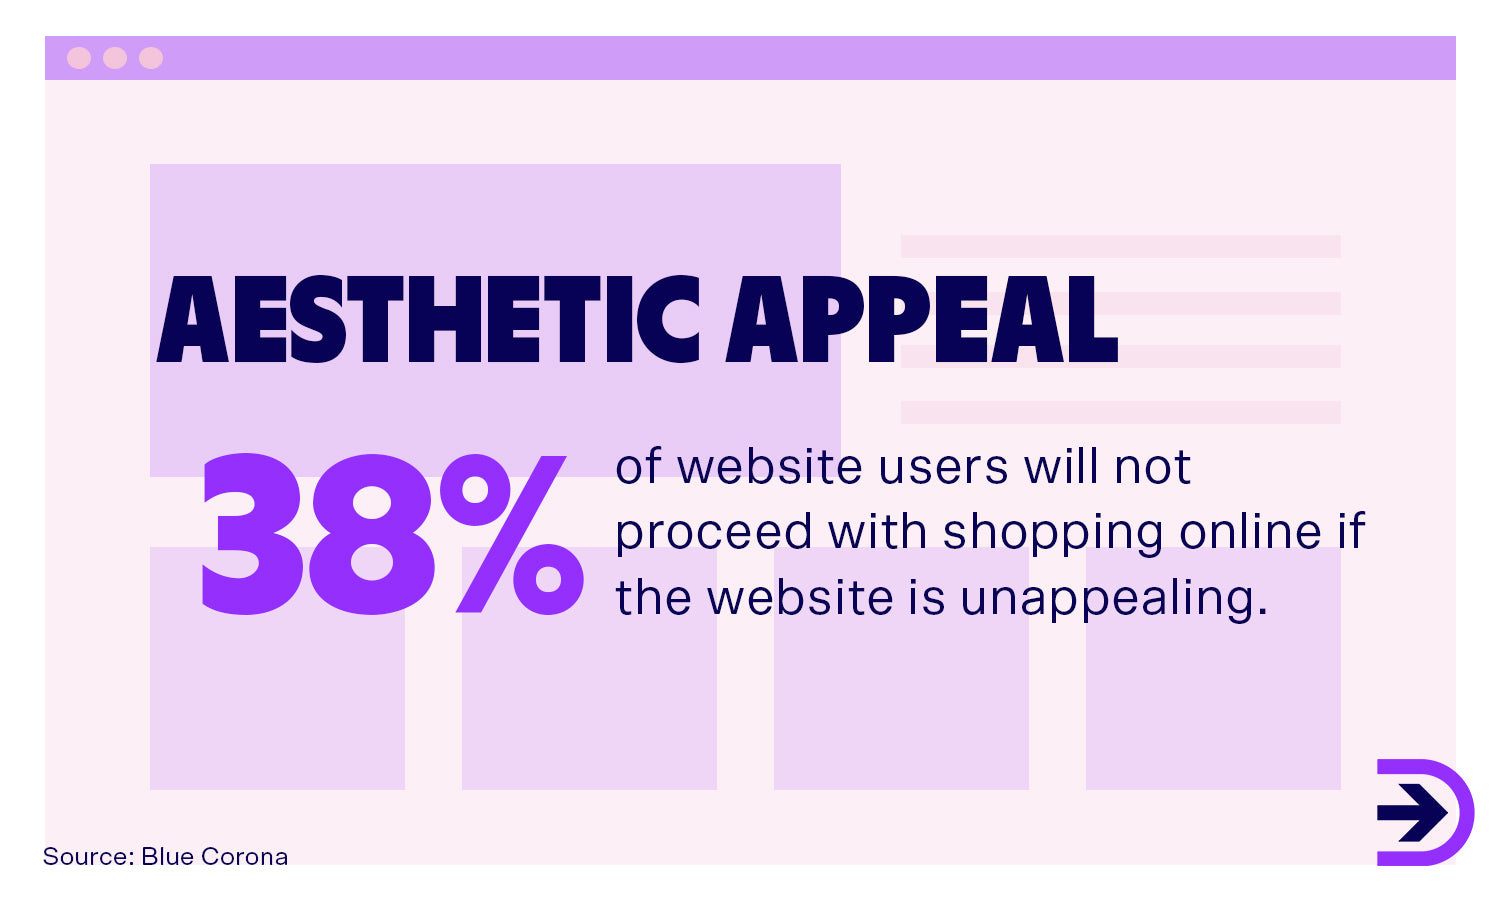 Attractive web design can have a strong impact on converting customers by influencing how they feel about a company’s credibility. 